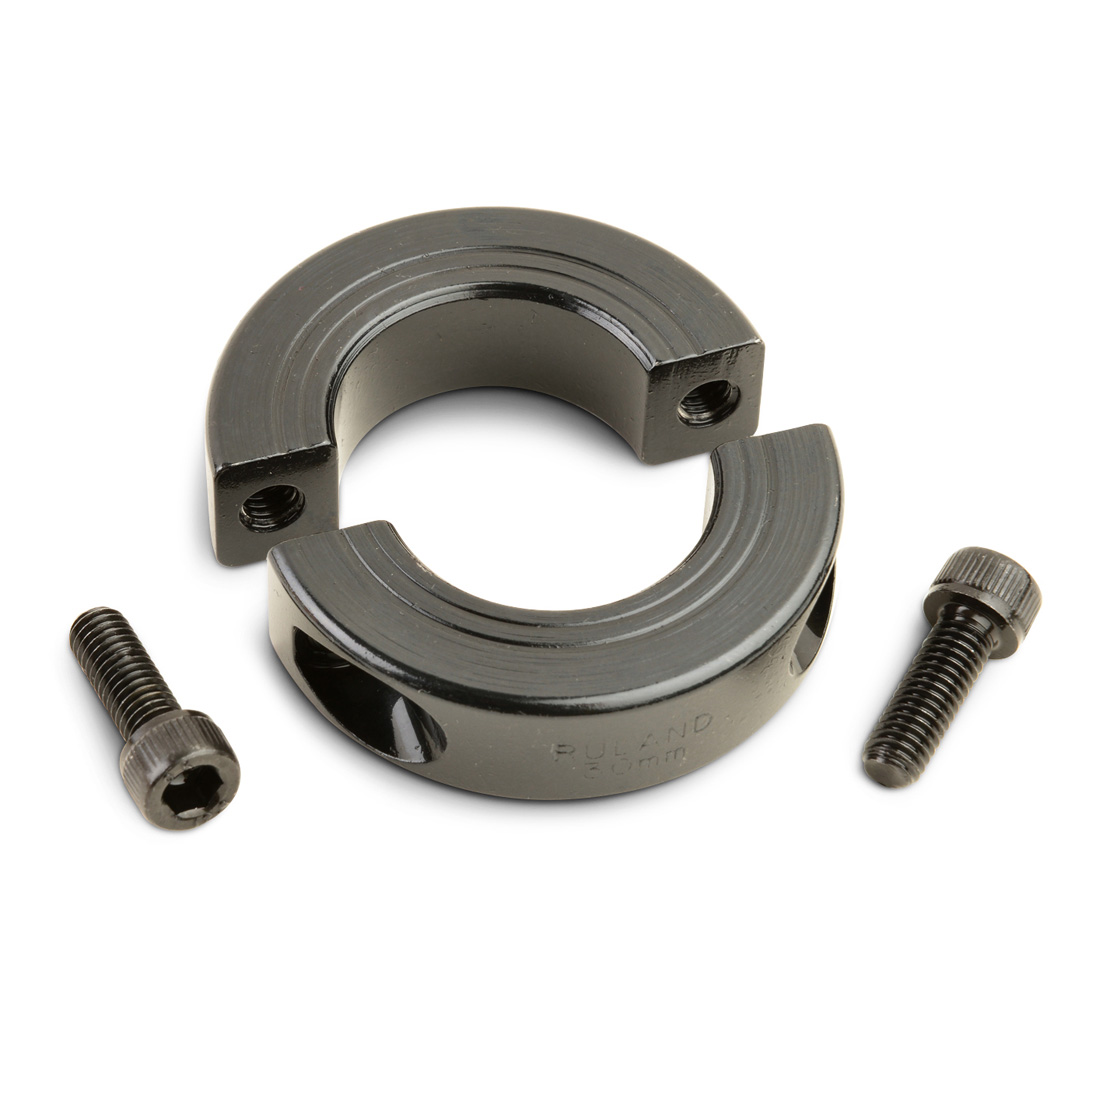 Ruland Manufacturing Co Inc SPC-18-18-F Side 2: 1.1250 in Clamp-On Rigid Coupling Black Oxide 1215 Lead-Free Steel Side 1: 1.1250 in Bore Bore SPC Series 